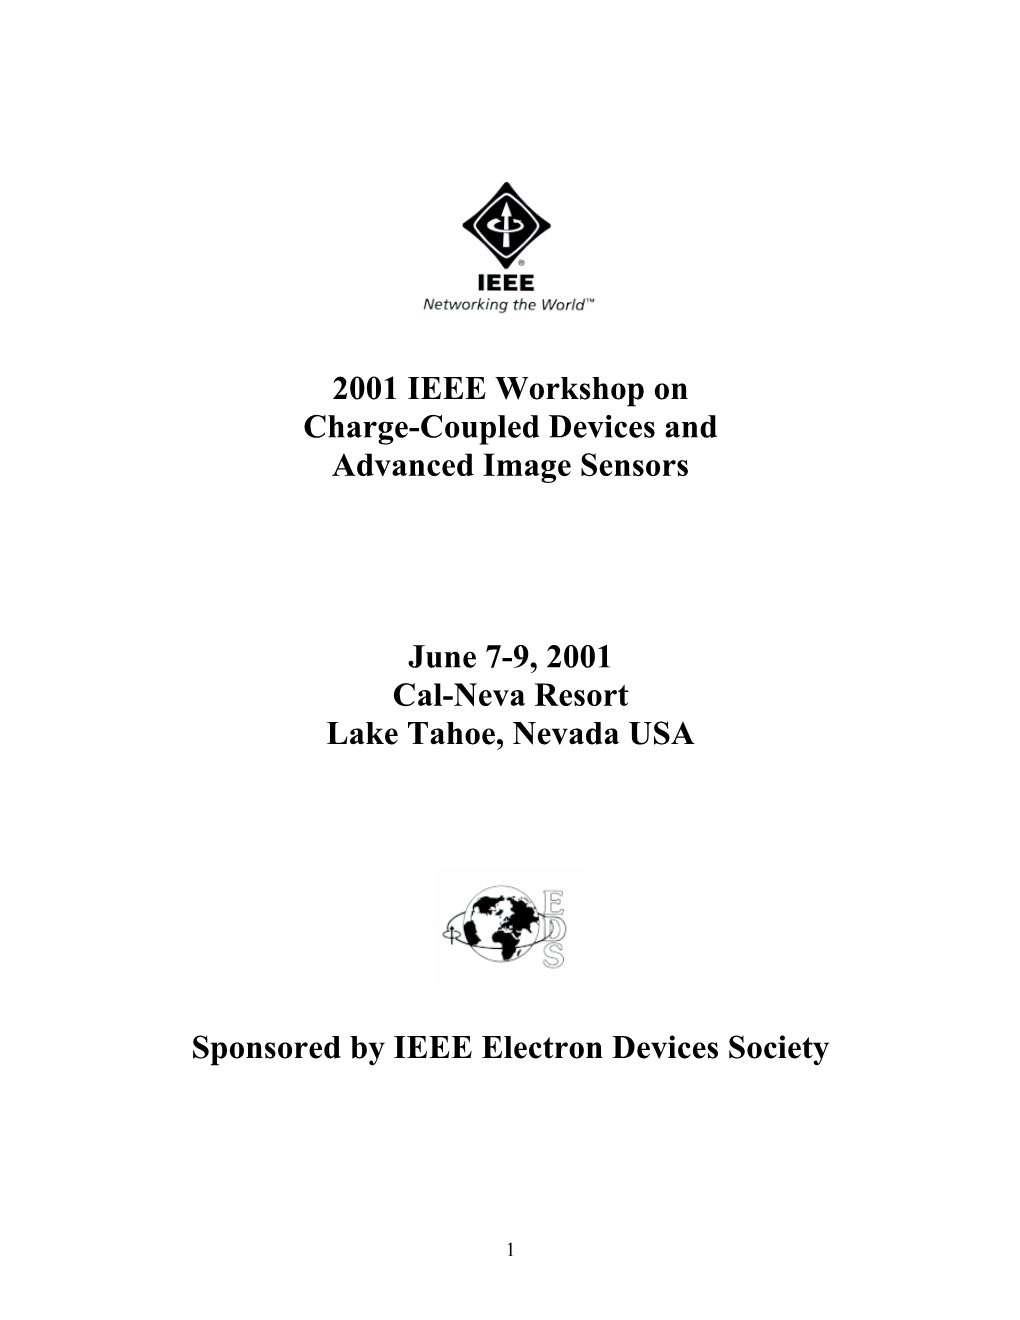 2001 IEEE Workshop on Charge-Coupled Devices and Advanced Image Sensors